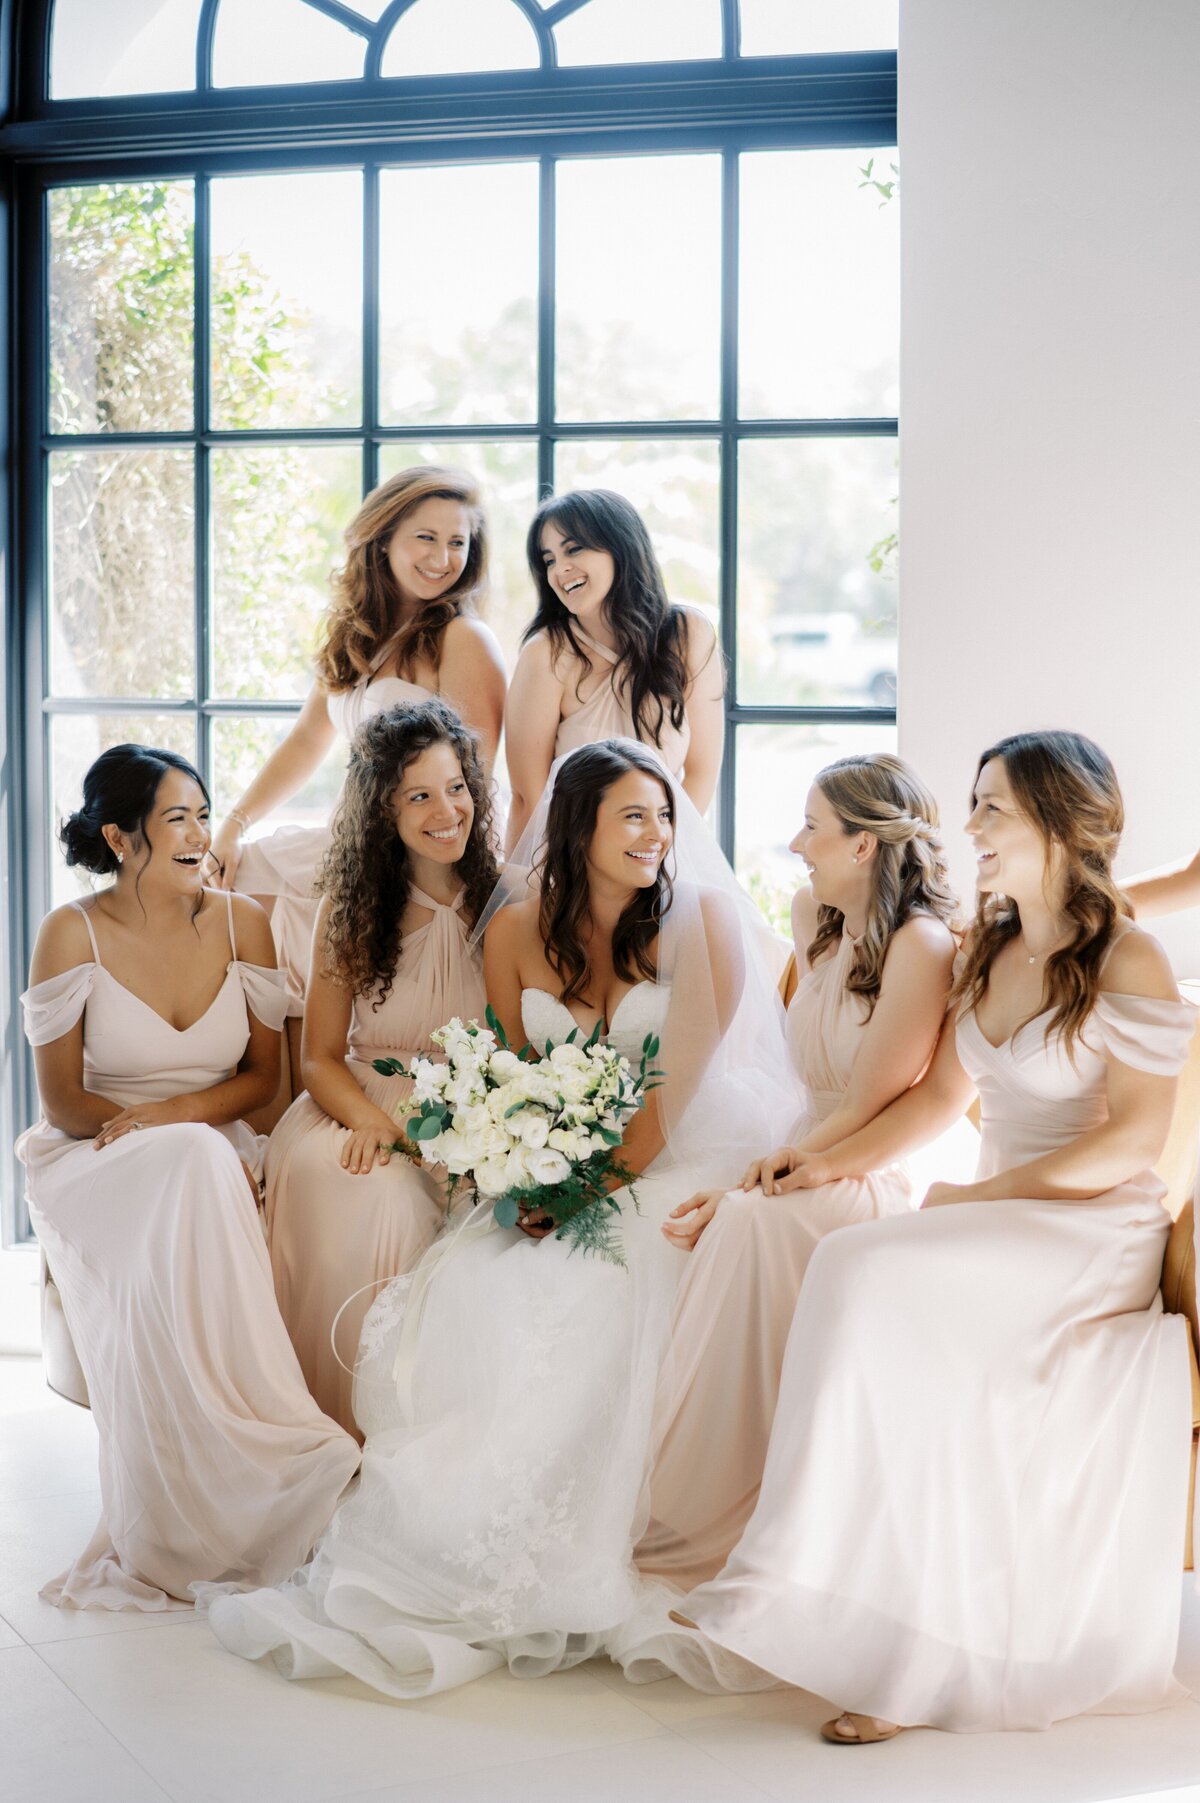 The bouquet stands out amongst the bride and her bridesmaids.